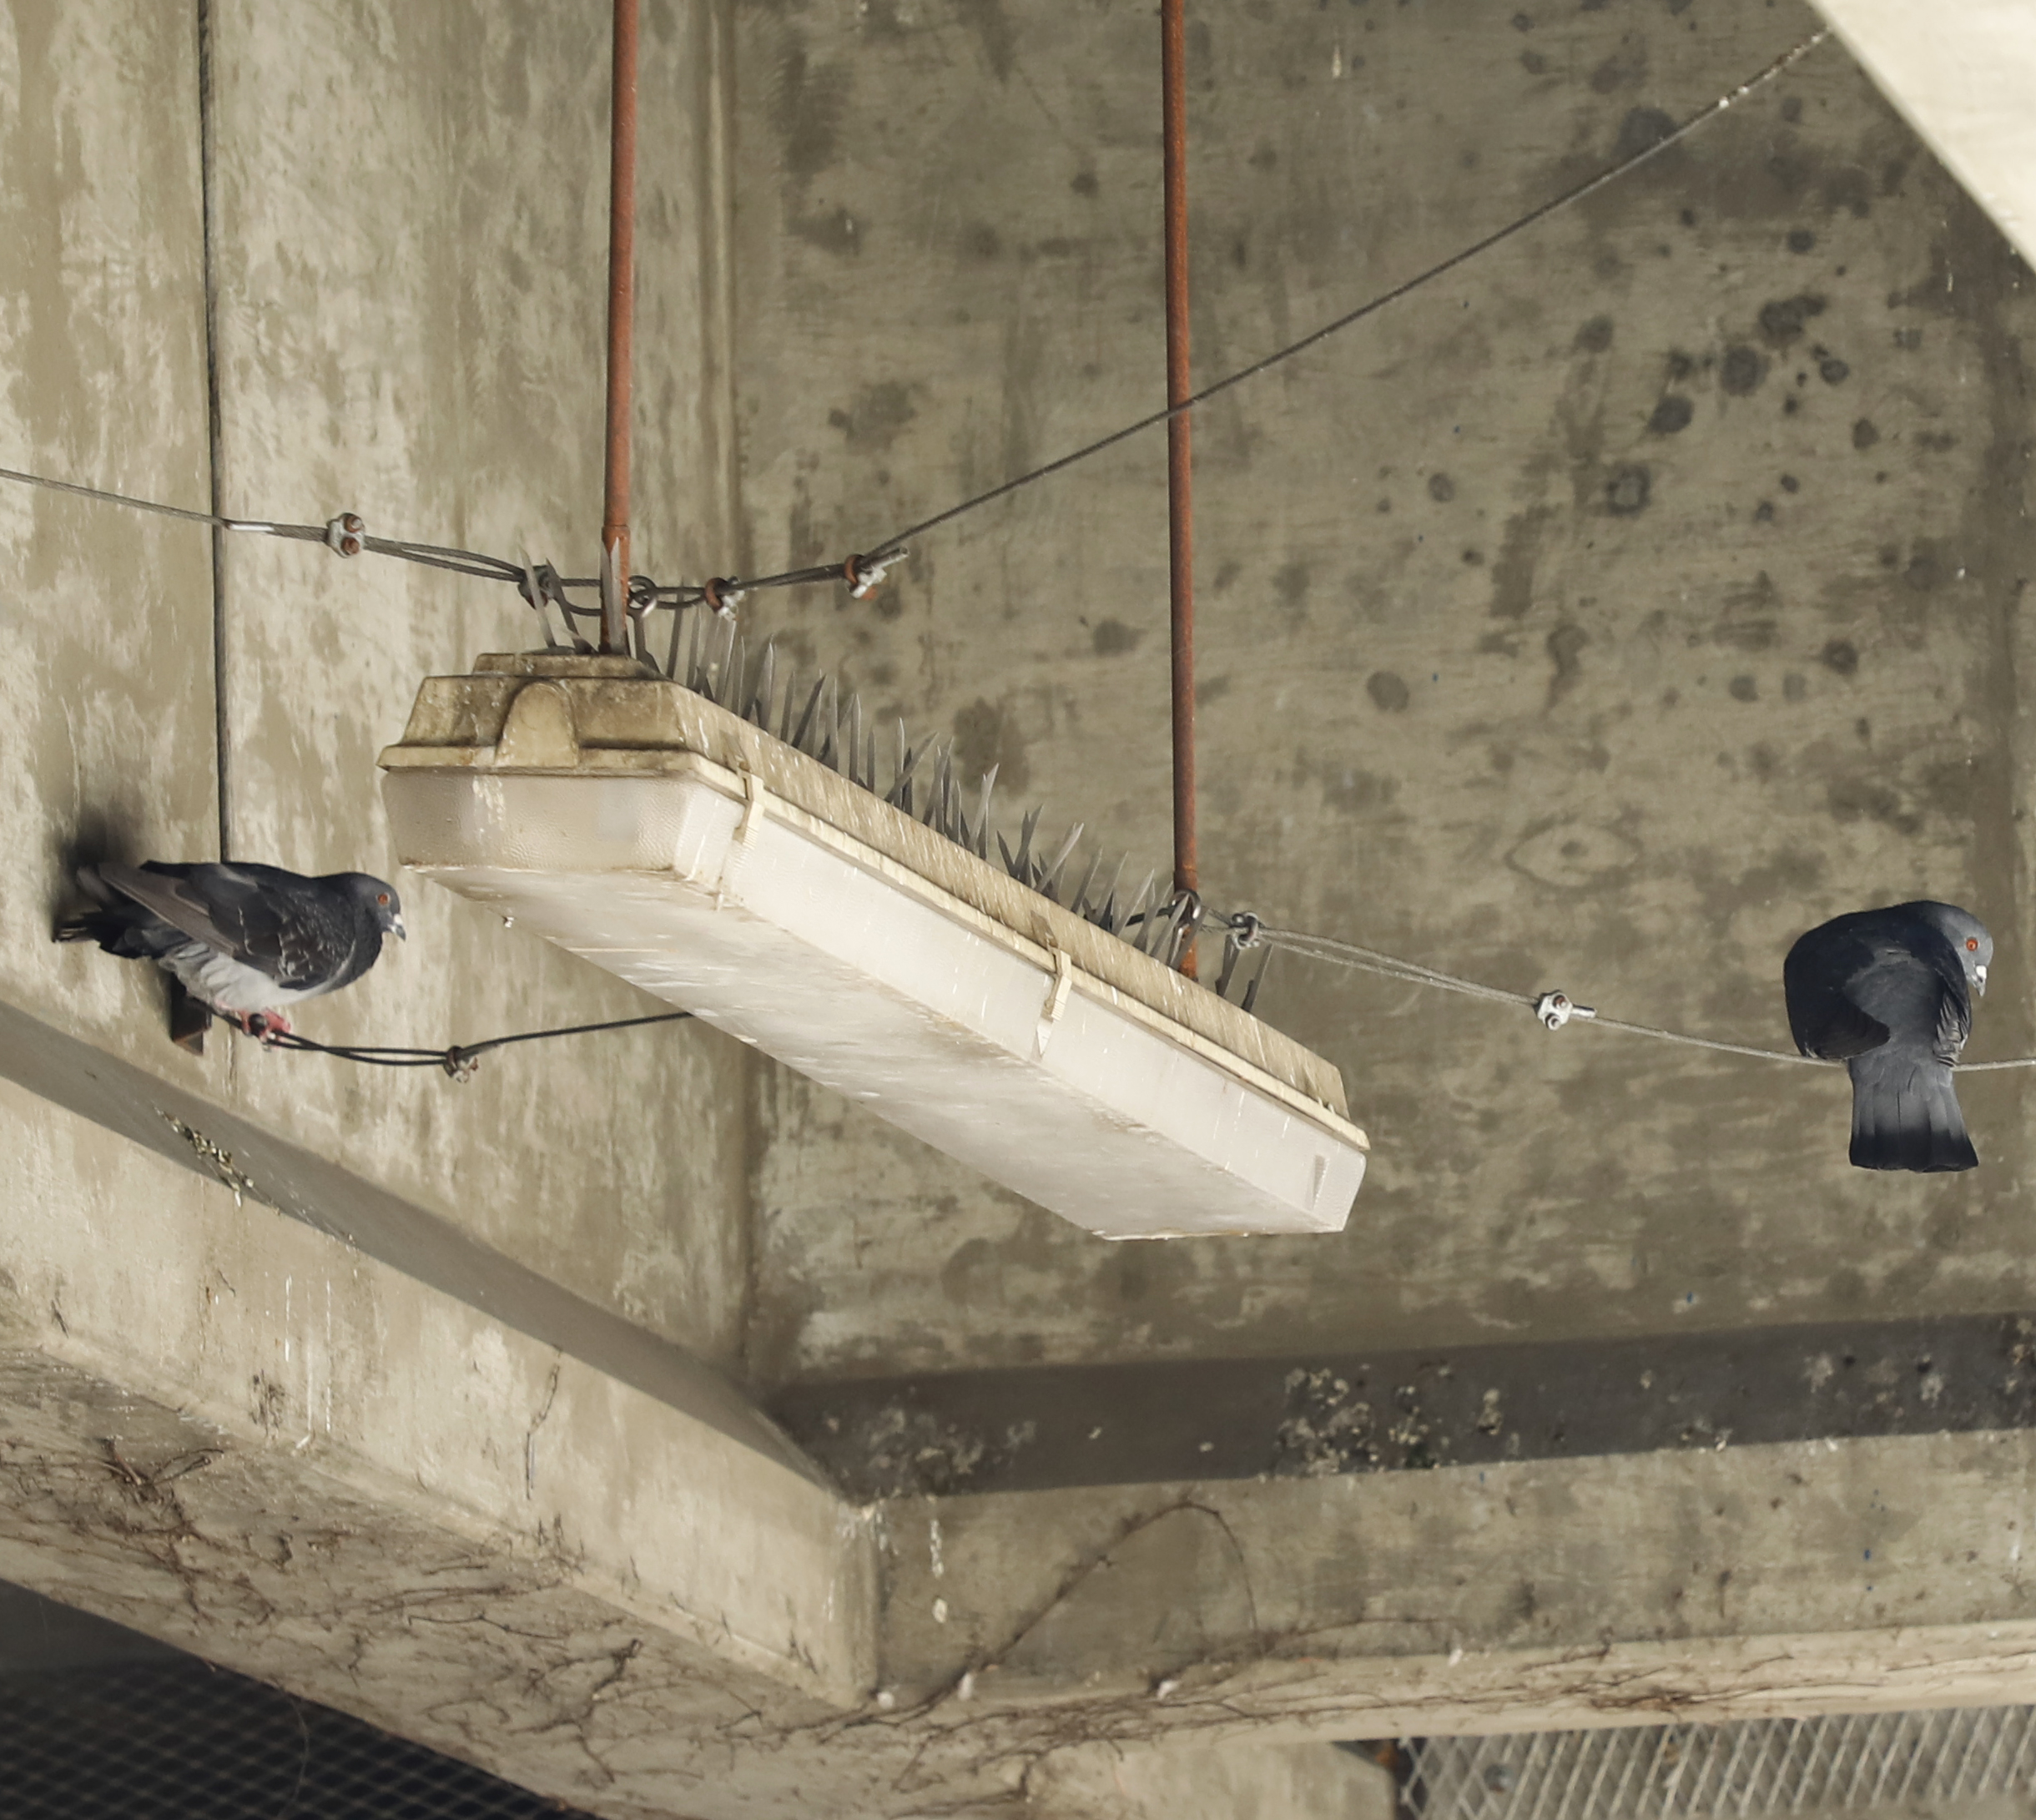 Two pigeons sit on wires beneath a concrete ceiling with a suspended light fixture that has bird spikes on top to prevent perching.